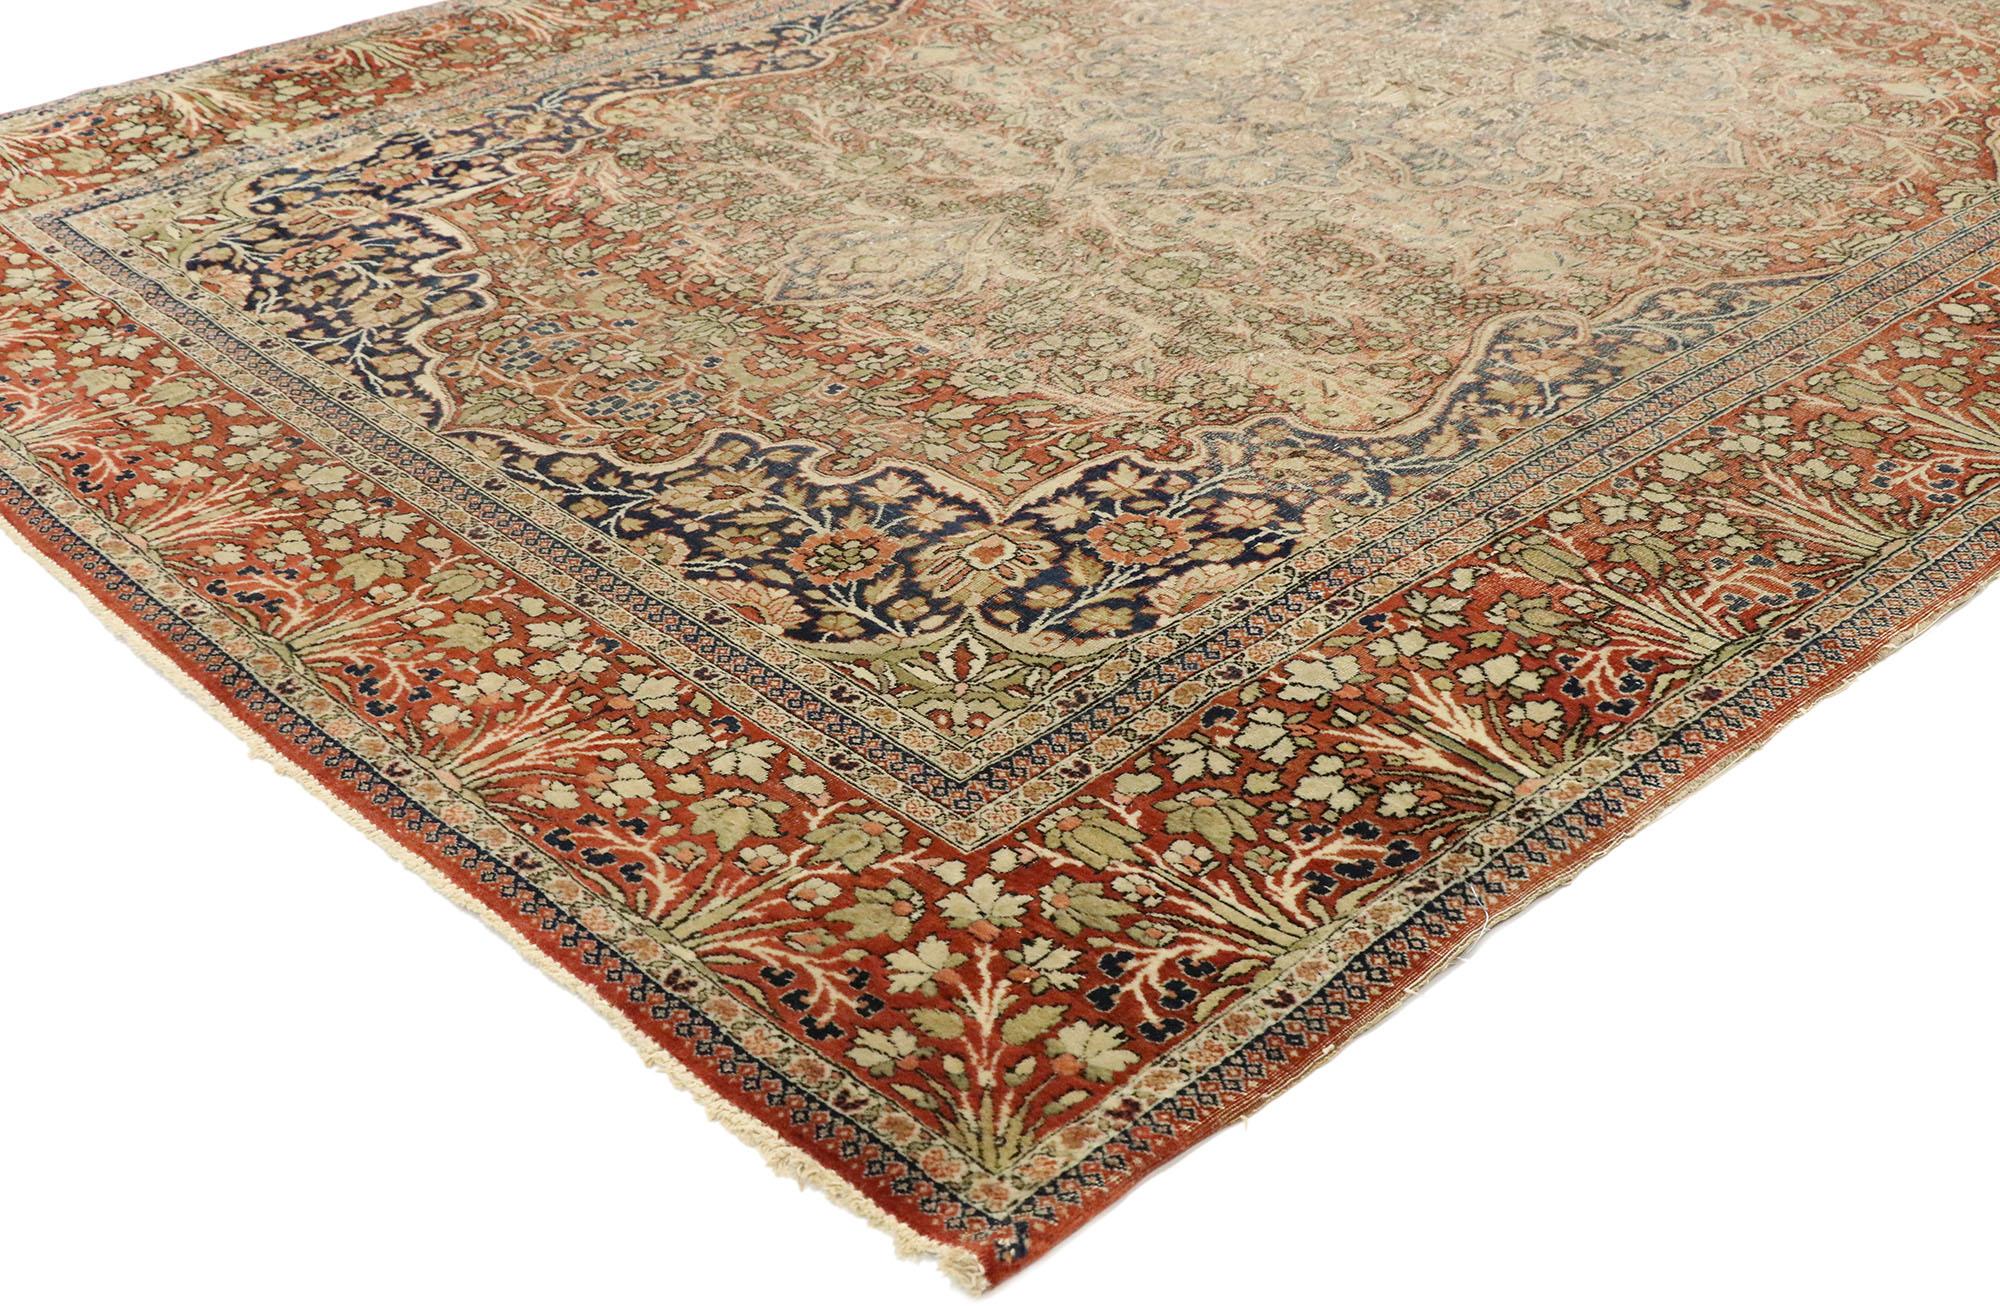 77444, distressed antique Persian Mohtesham Kashan rug with modern rustic English style. With its perfectly worn-in charm and rustic sensibility, this hand-knotted wool distressed antique Persian Mohtesham Kashan rug will take on a curated lived-in